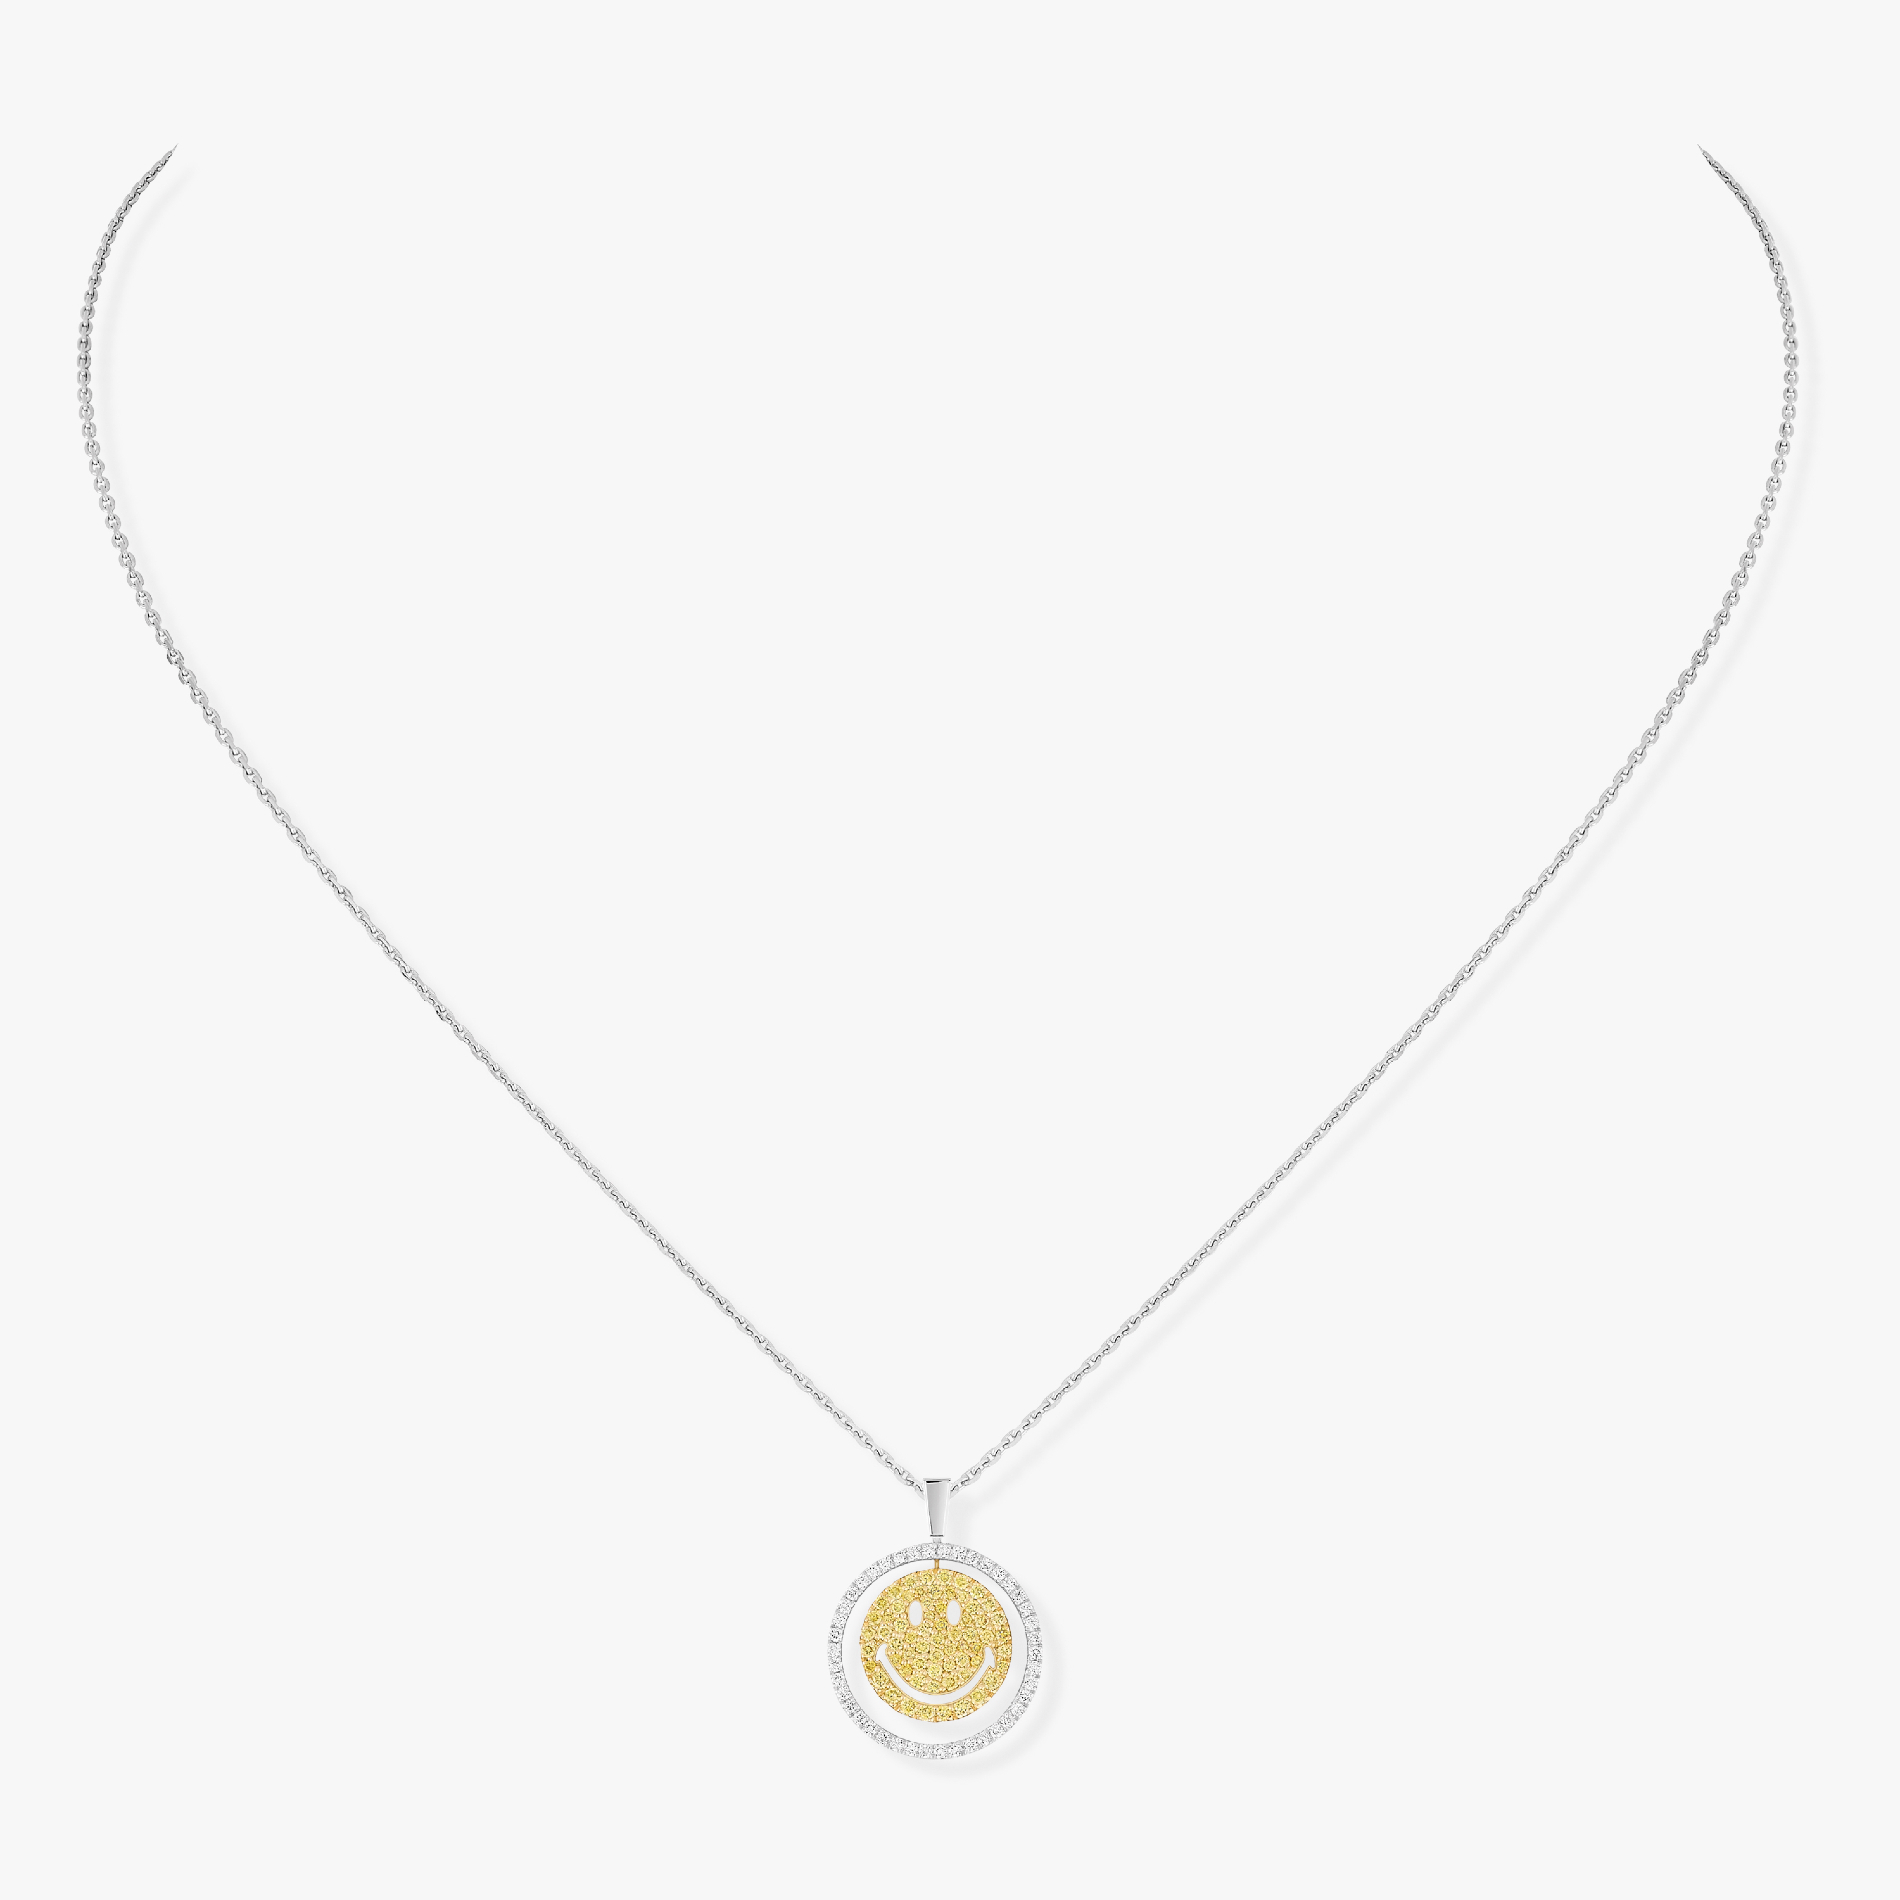 Smiley Necklace PM White Gold For Her Diamond Necklace 12265-WY